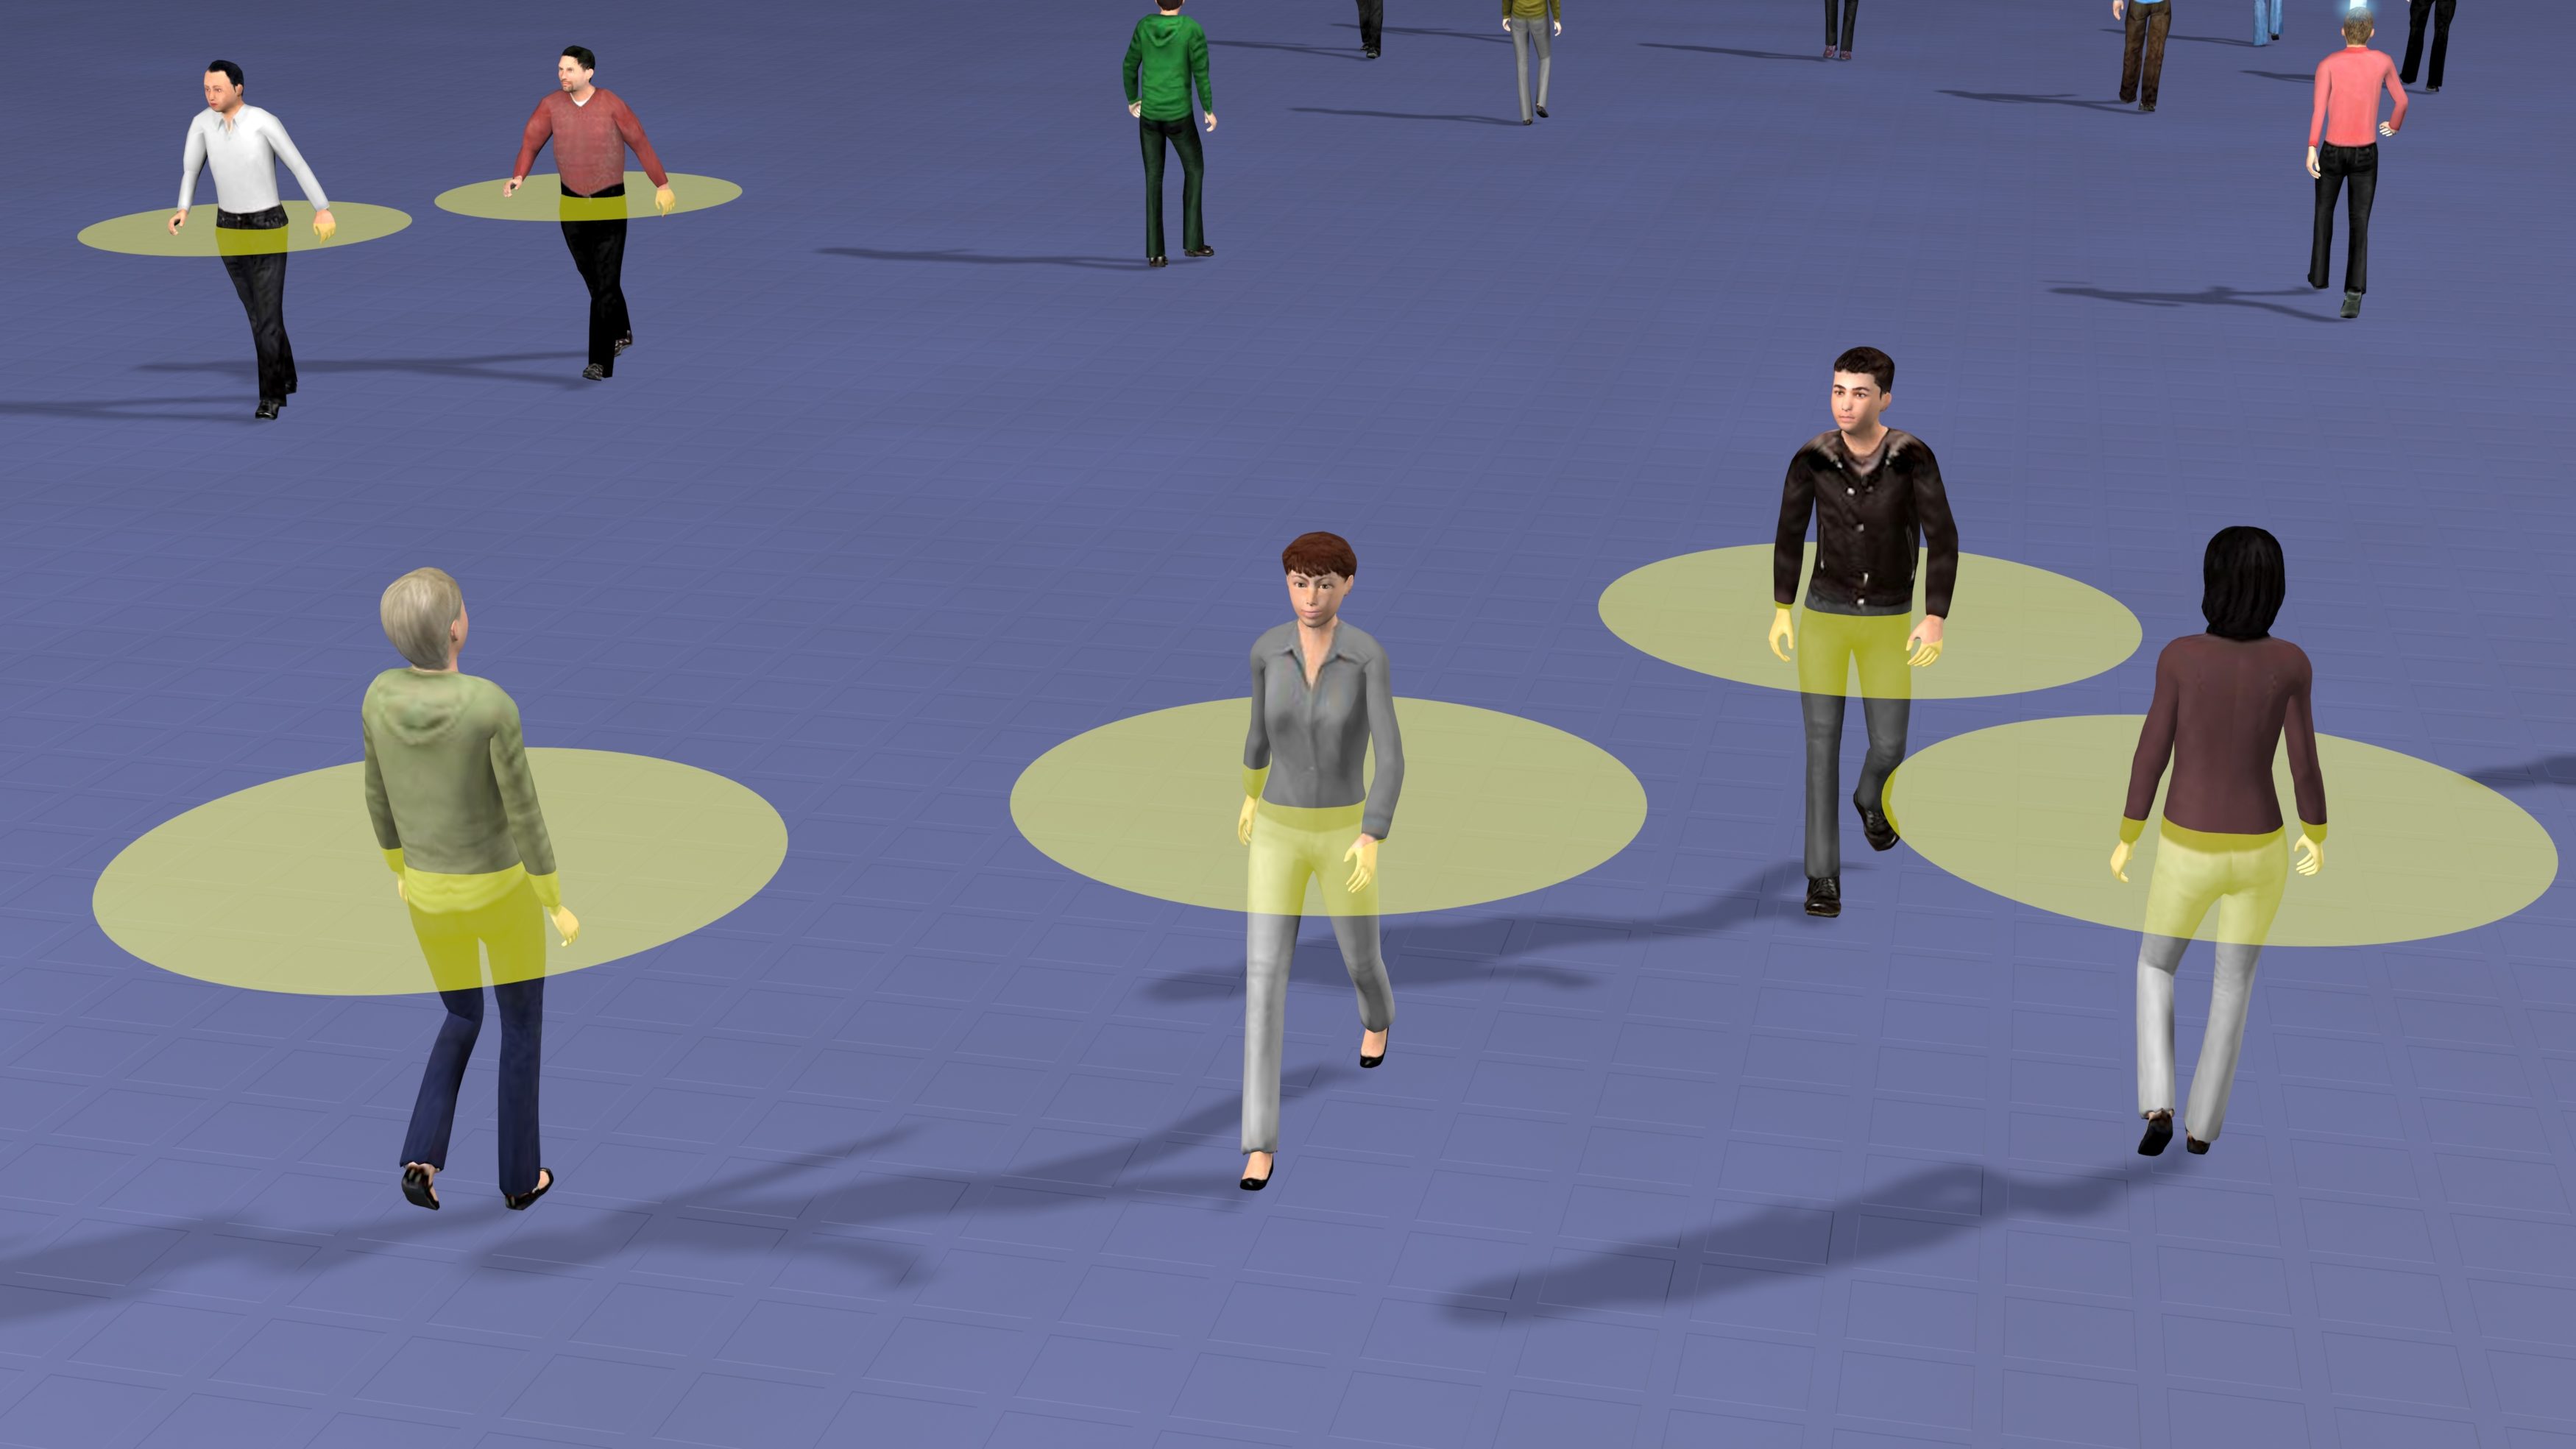 Crowd of people walking and maintaining safe physical distance from others.  Transparent disk defines safety zone to avoid close contact.  Social distancing theme. 3d rendering illustration